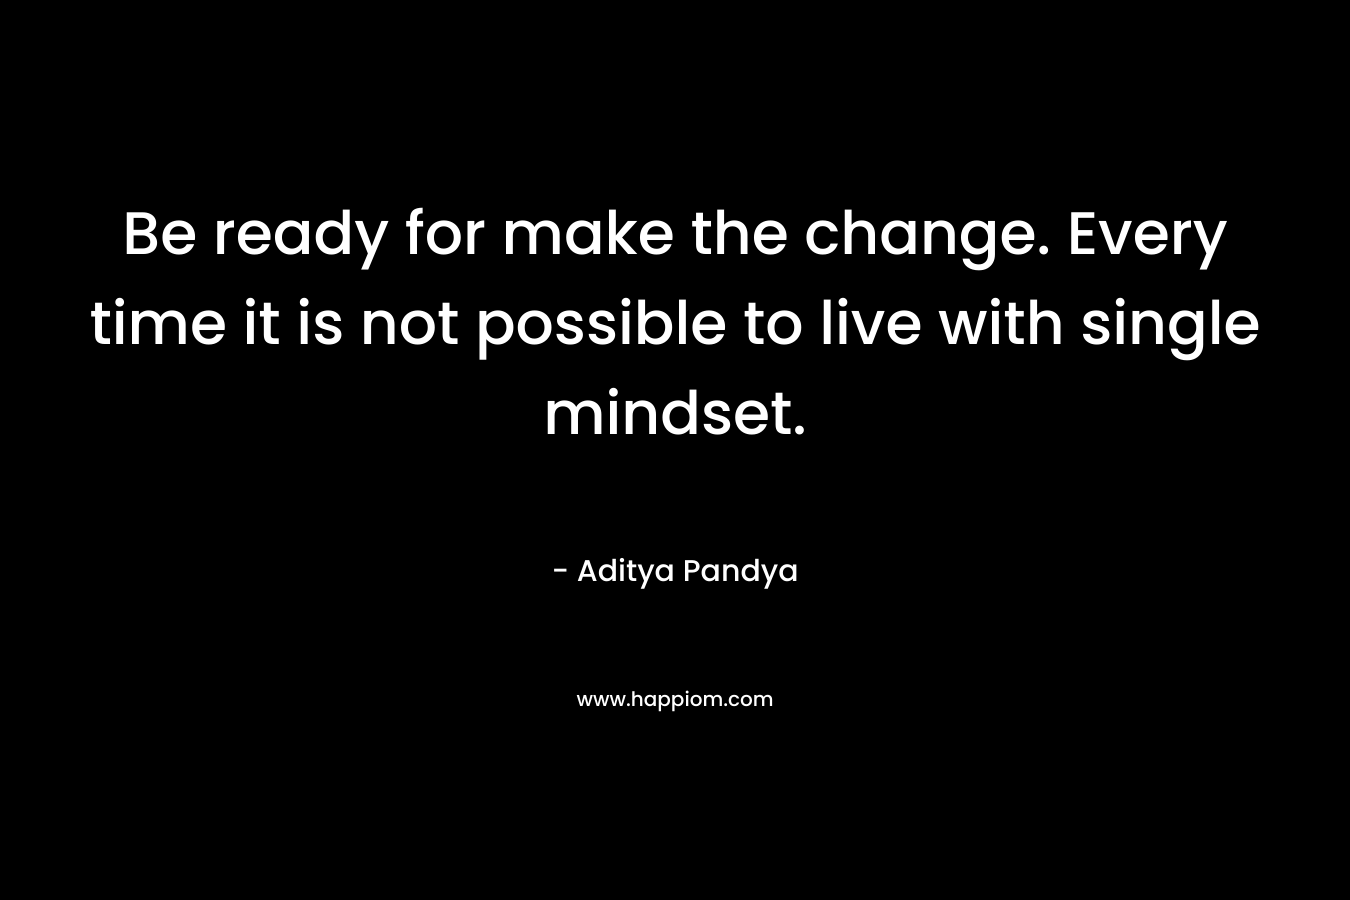 Be ready for make the change. Every time it is not possible to live with single mindset. – Aditya Pandya